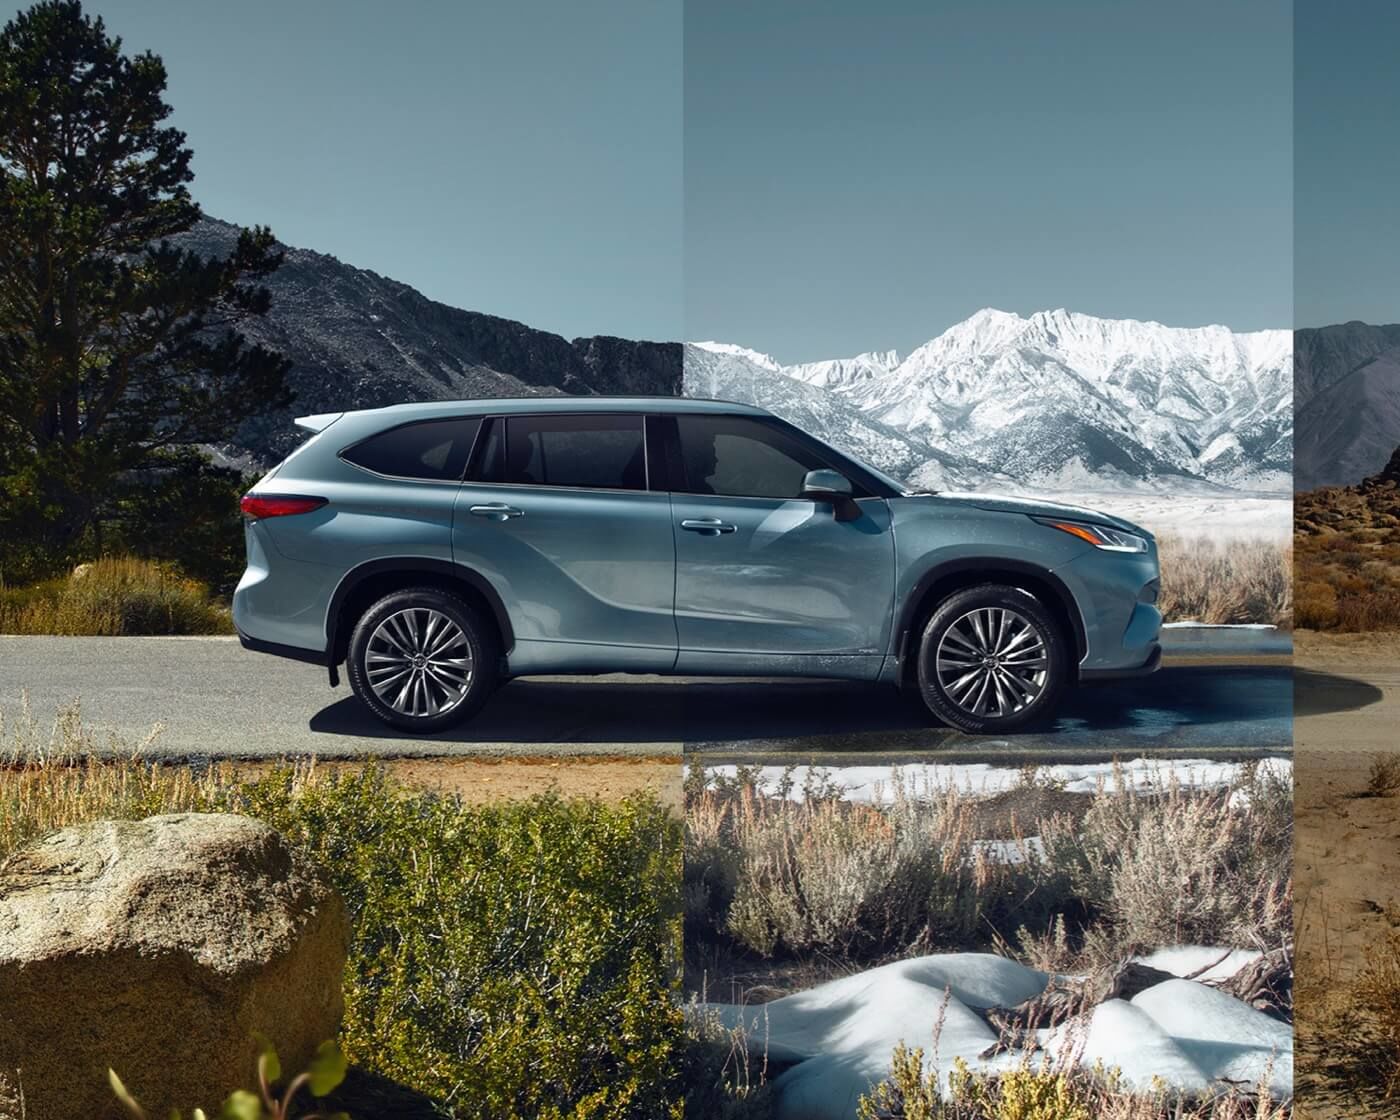 Side view of a 2022 Toyota Highlander Platinum Hybrid SUV parked between a summer background and facing winter